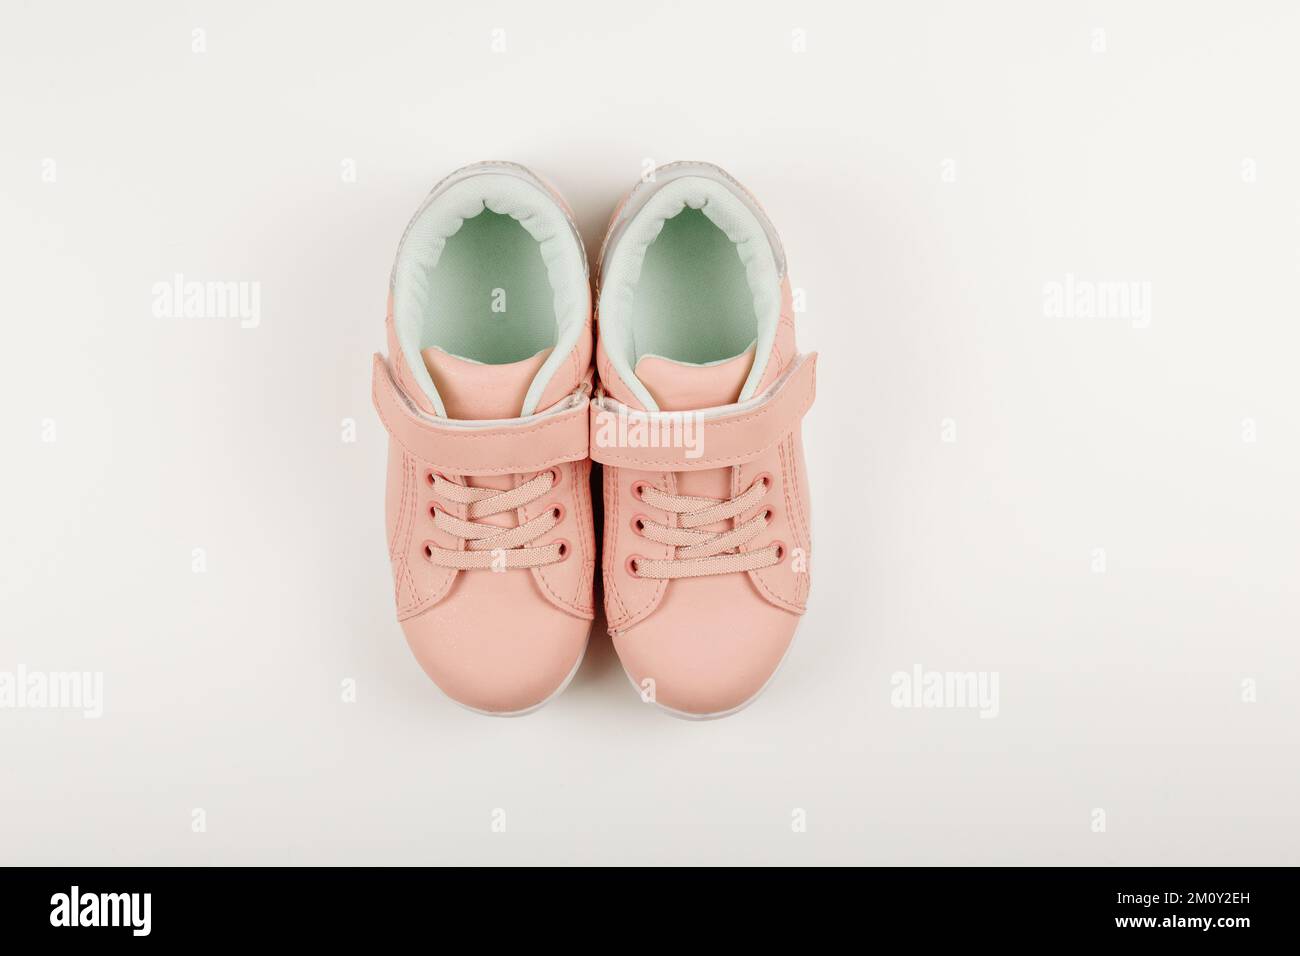 Cute pink children's sneakers. White background. Baby clothes and shoes. Flatlay,copy space Stock Photo